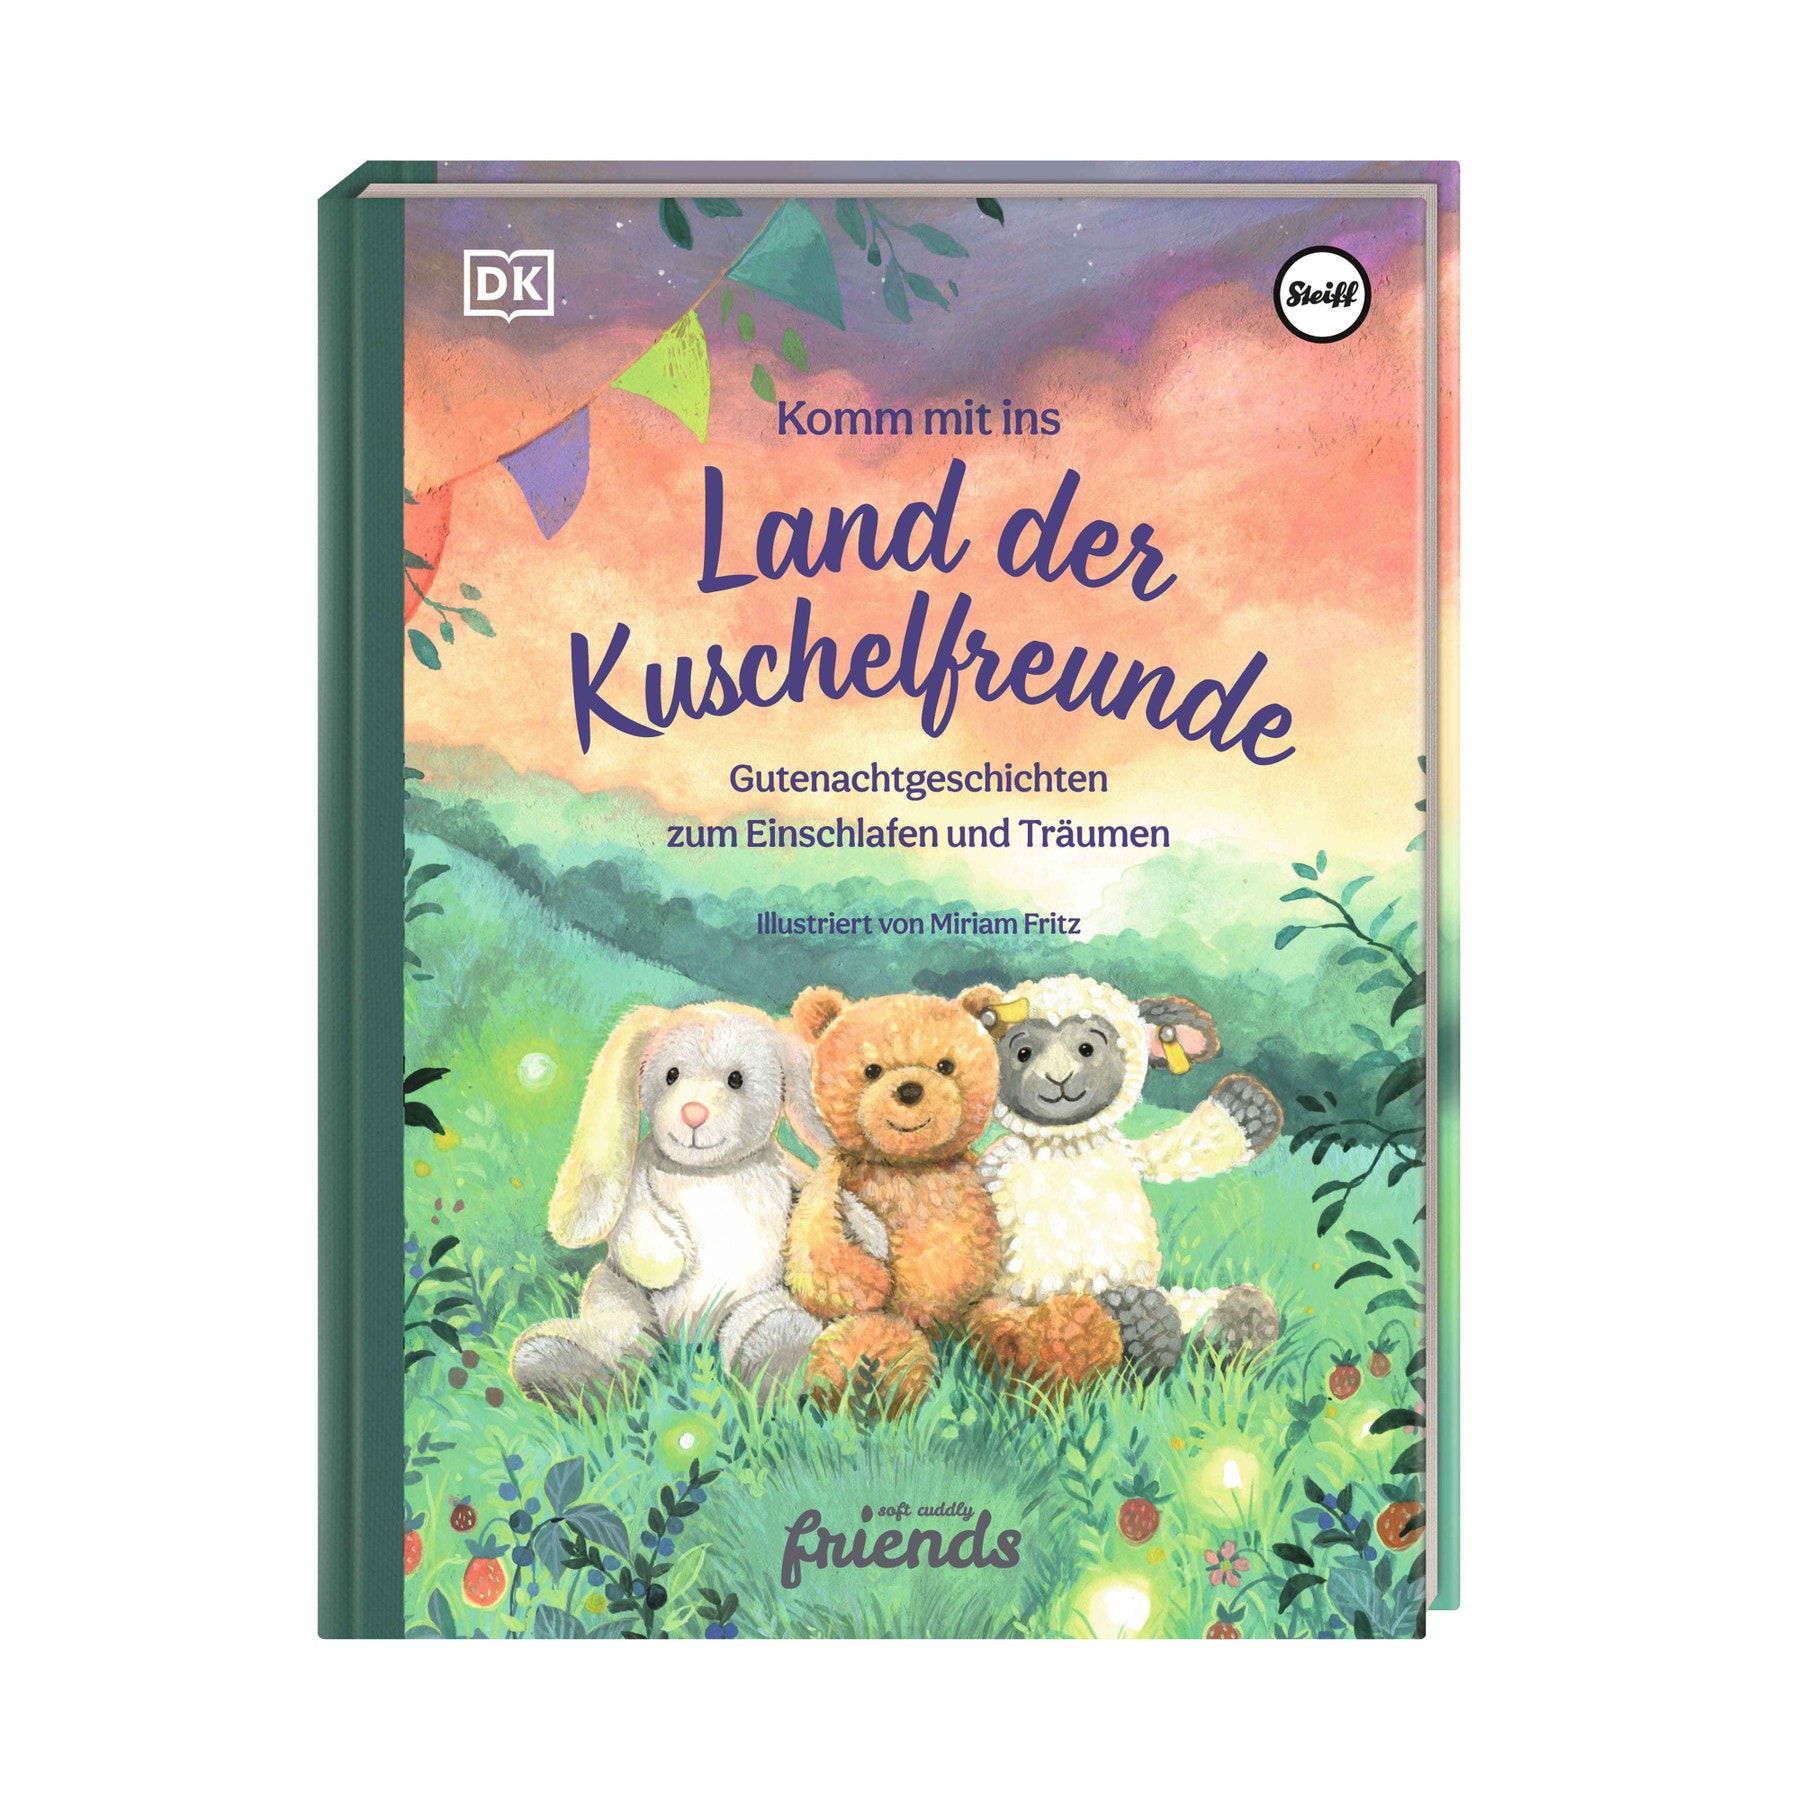 Land of the cuddly friends reading book